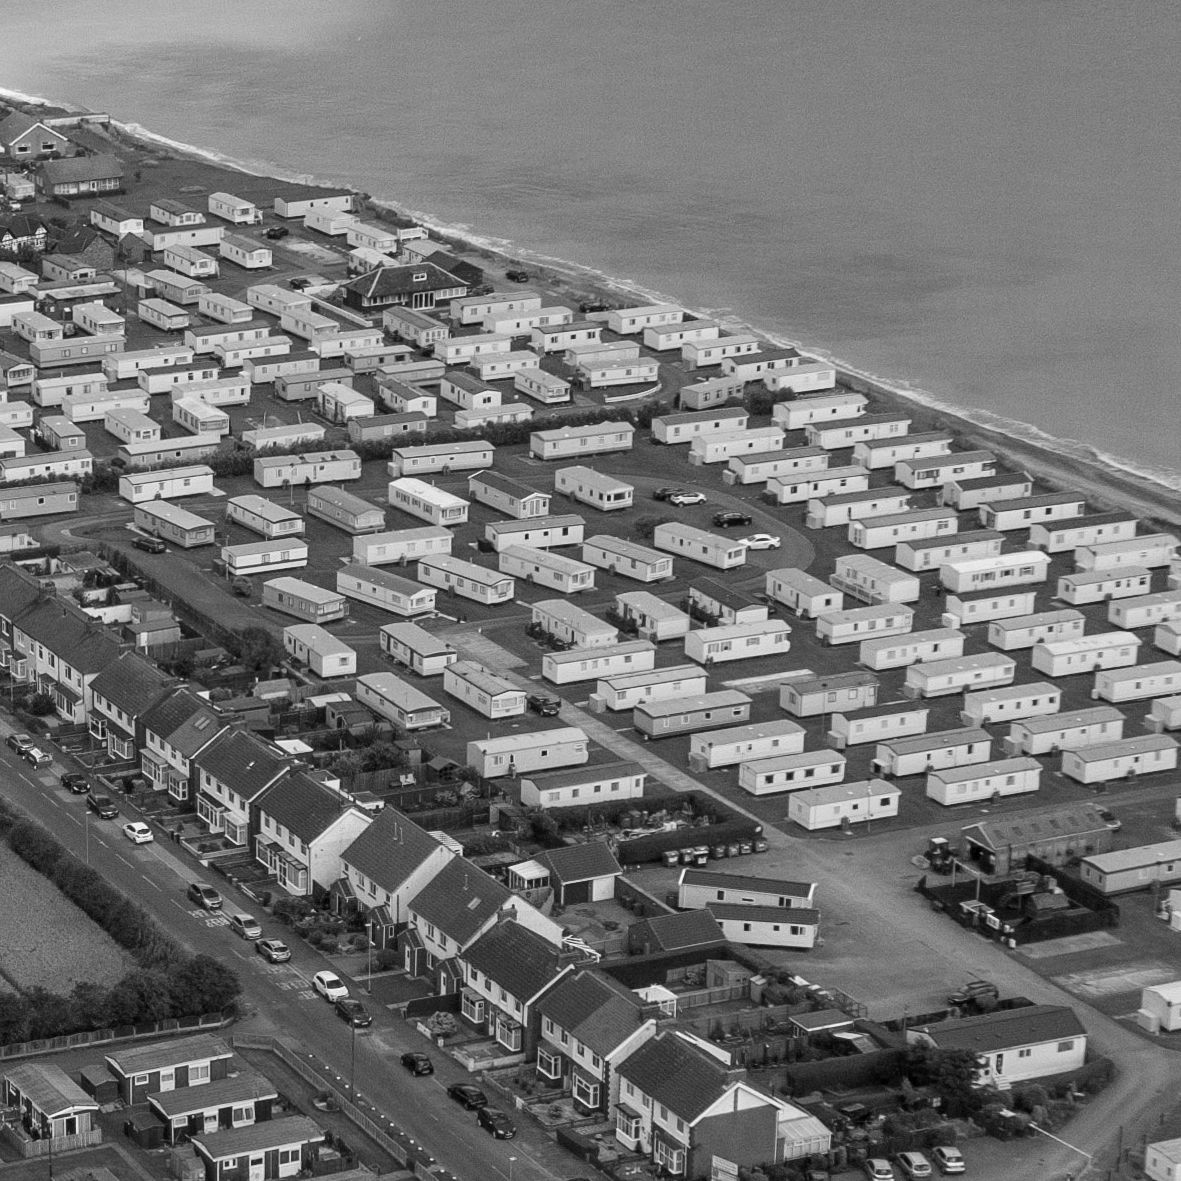 Another caravan park wondering whether Business Property Relief is available for Inheritance Tax purposes.  Not as easy as you might think.  #SeekAdvice #FamilyBusiness #Caravan Parks